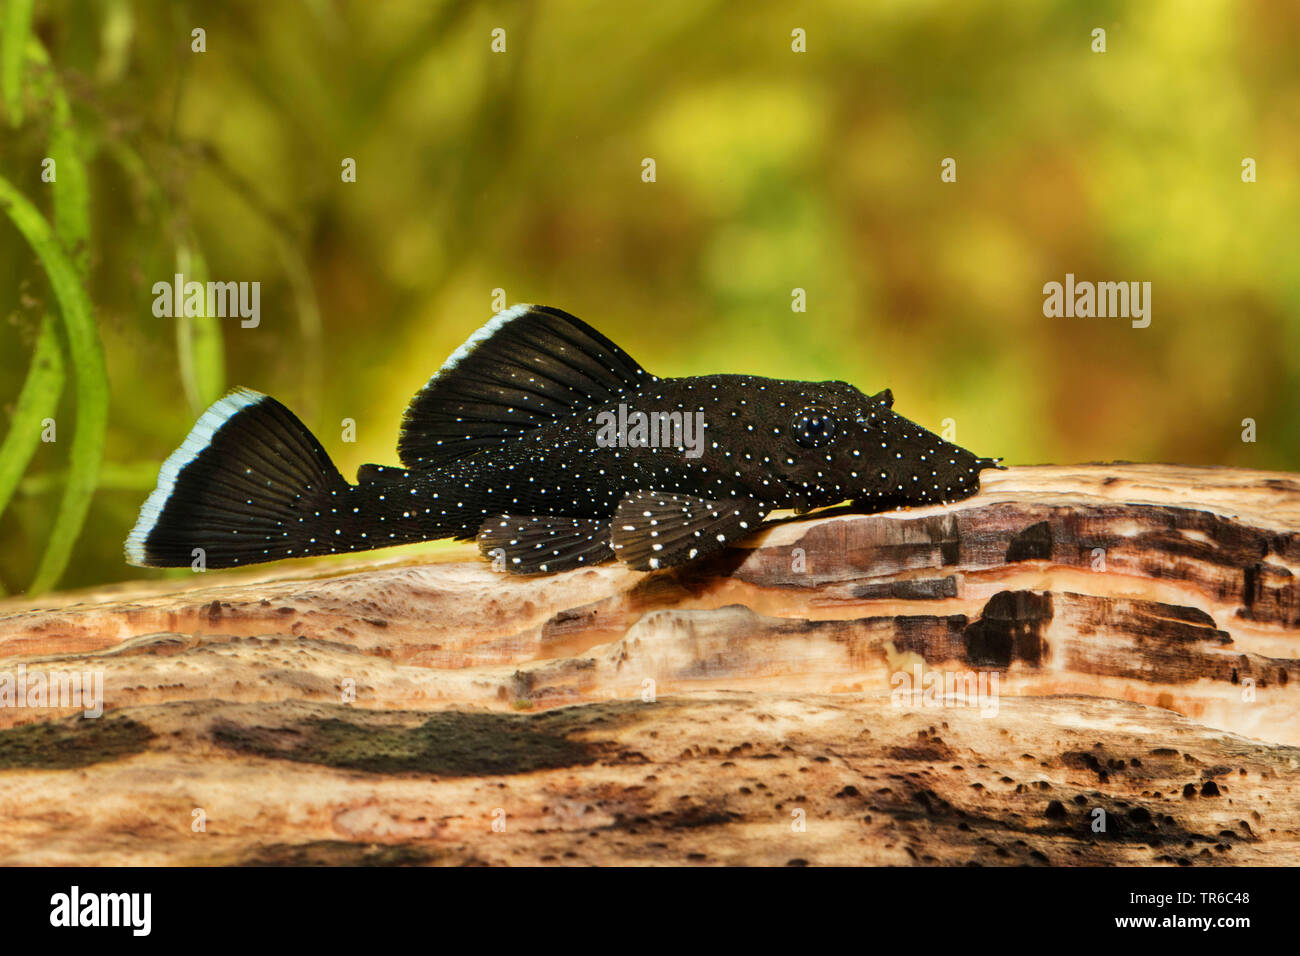 Snowflake bristlenose, Spotted bristle-nosed catfish (Ancistrus dolichopterus ), on wood under water, side view Stock Photo